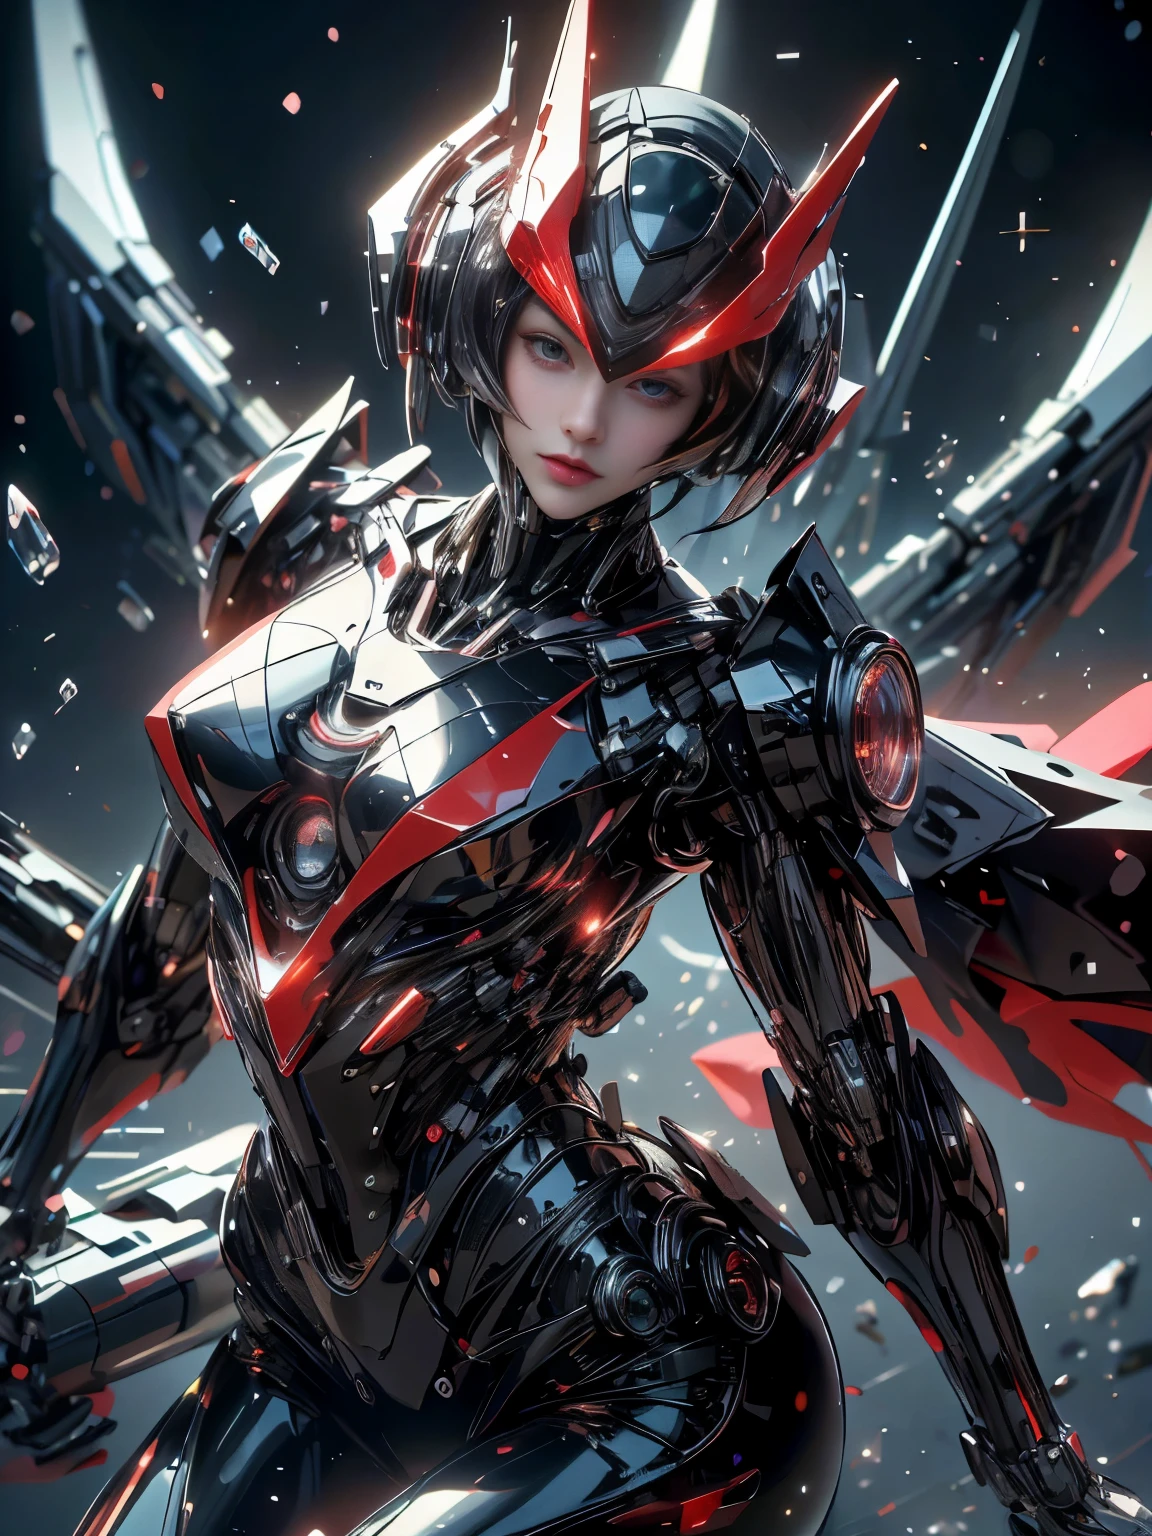 best image quality, excellent details, ultra high resolution, (realism: 1.6), best illustrations, Favor details, condensed 1girl, With a delicate and beautiful face, (Dressed in a black and red mecha),((wearing a Mechanical helmet )), Accurately express details such as faces and skin textures,((beautiful face and eyes)), (short hair),full body,slender body shape,alone,medium breast,The background is a high-tech lighting scene of a futuristic city.